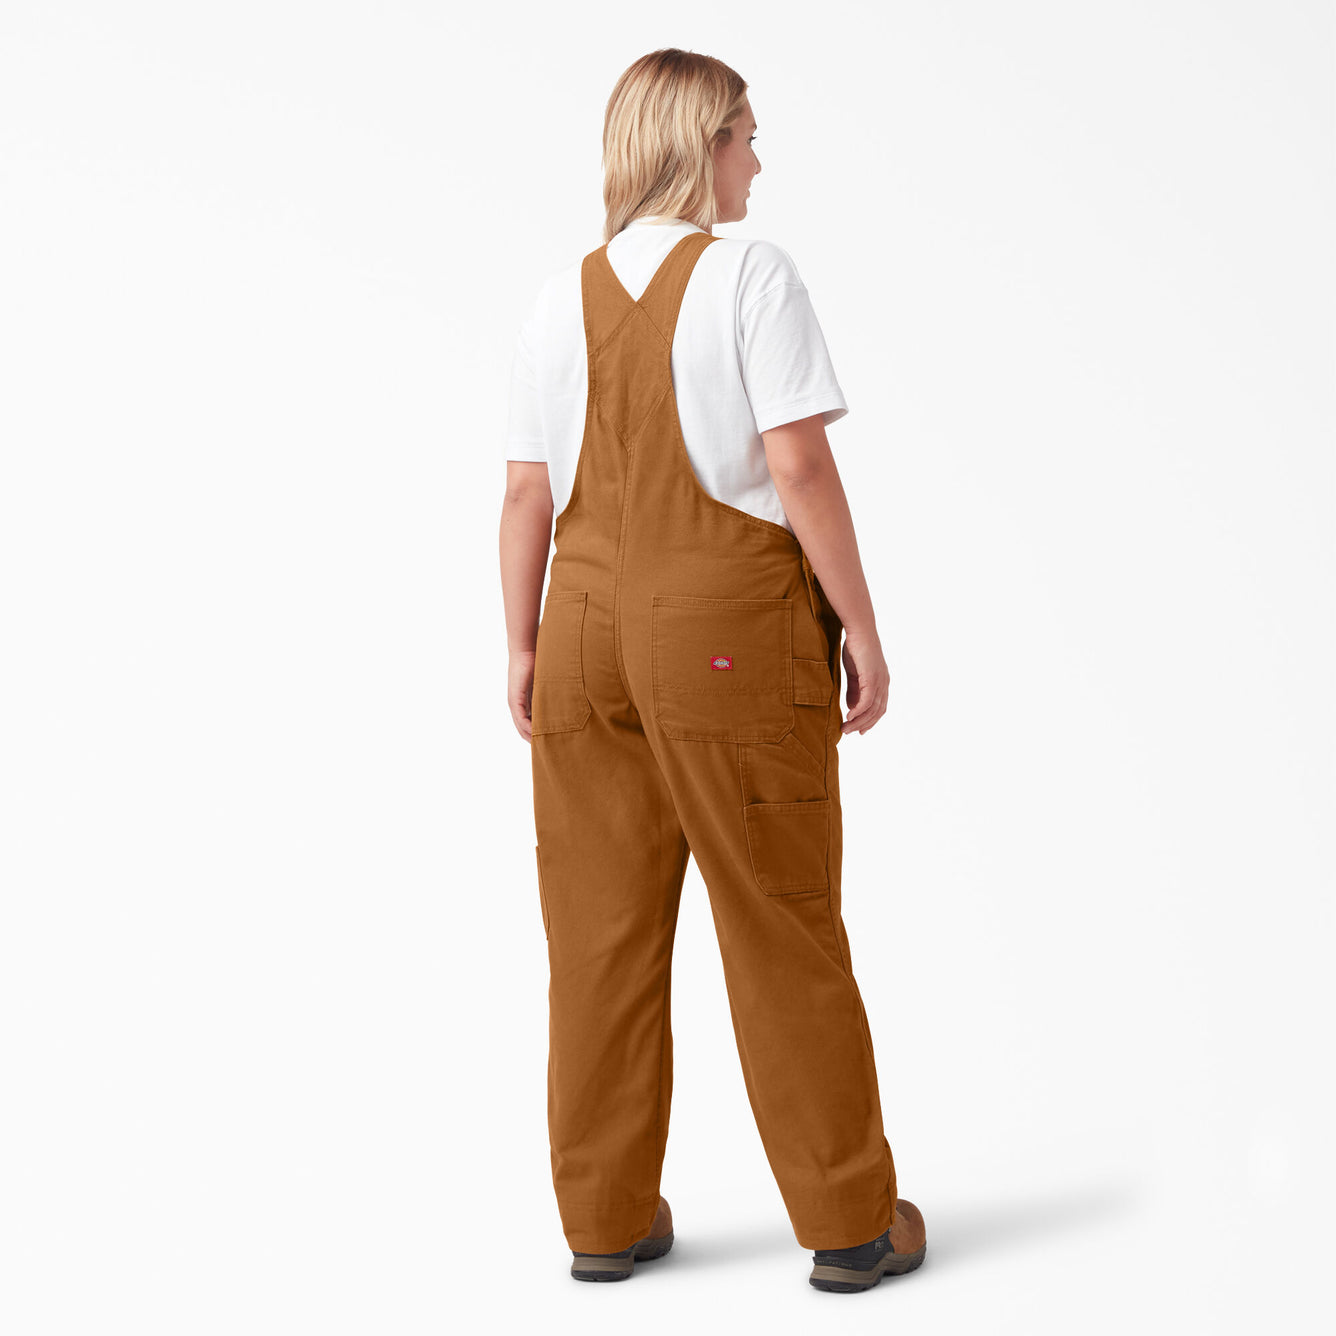 Dickies  -  #FBW206 - Made to Fit the Curvy Girl - Women's Plus Relaxed Fit Straight Leg Bib Overalls